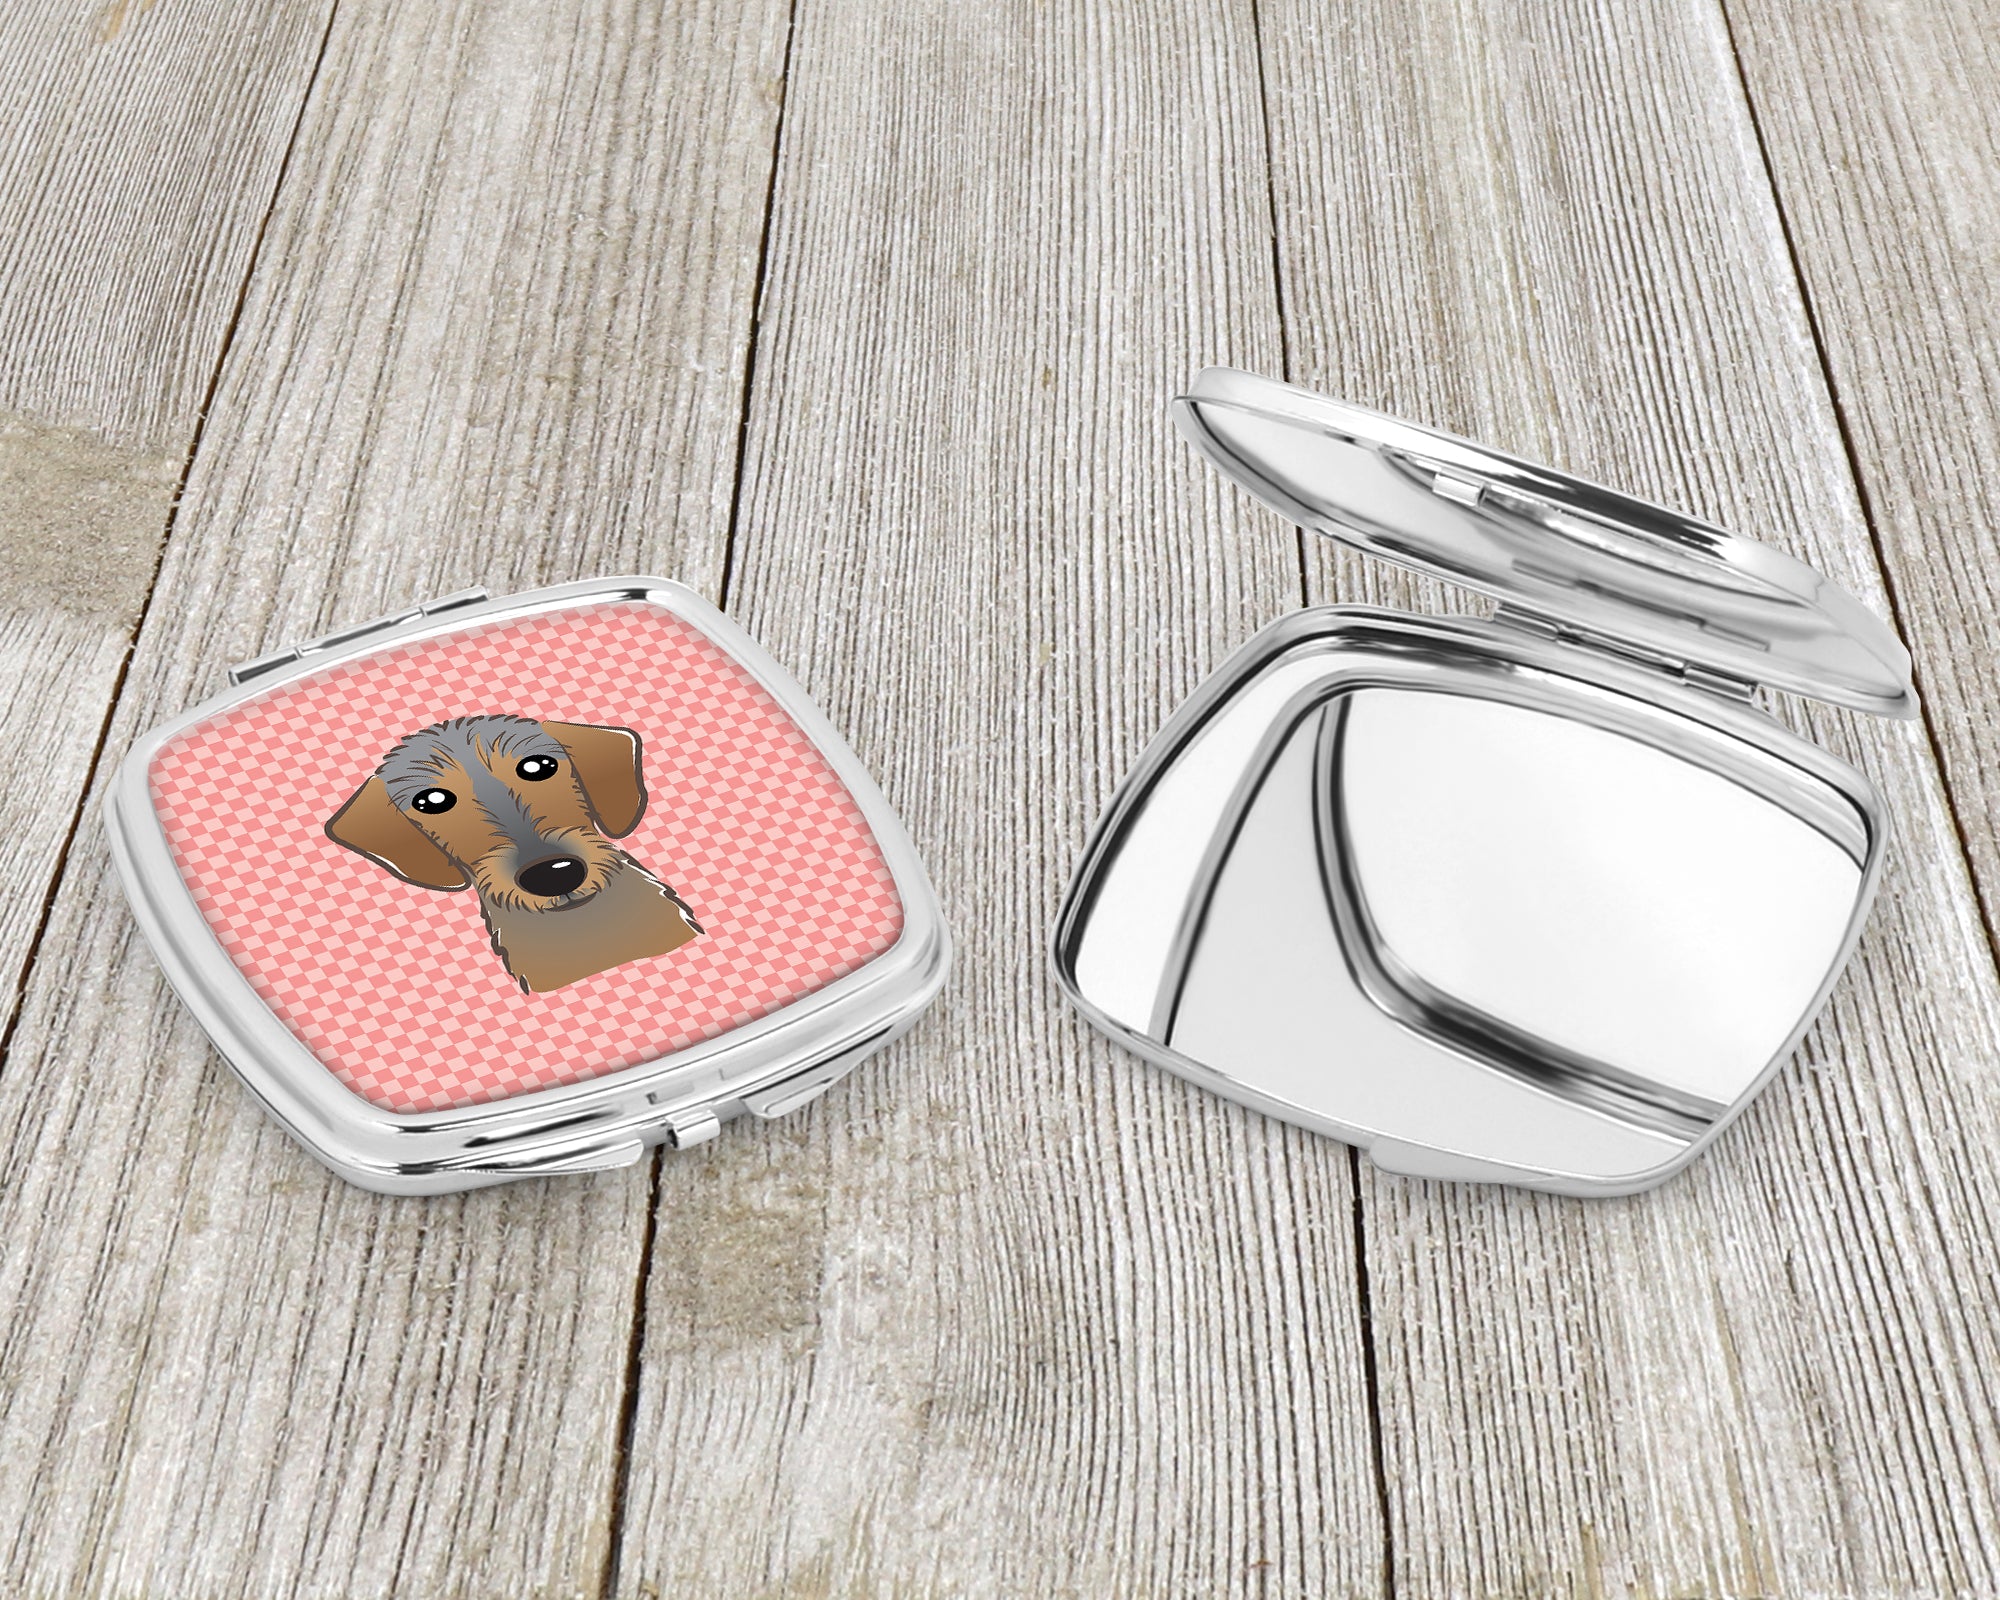 Checkerboard Pink Wirehaired Dachshund Compact Mirror BB1233SCM